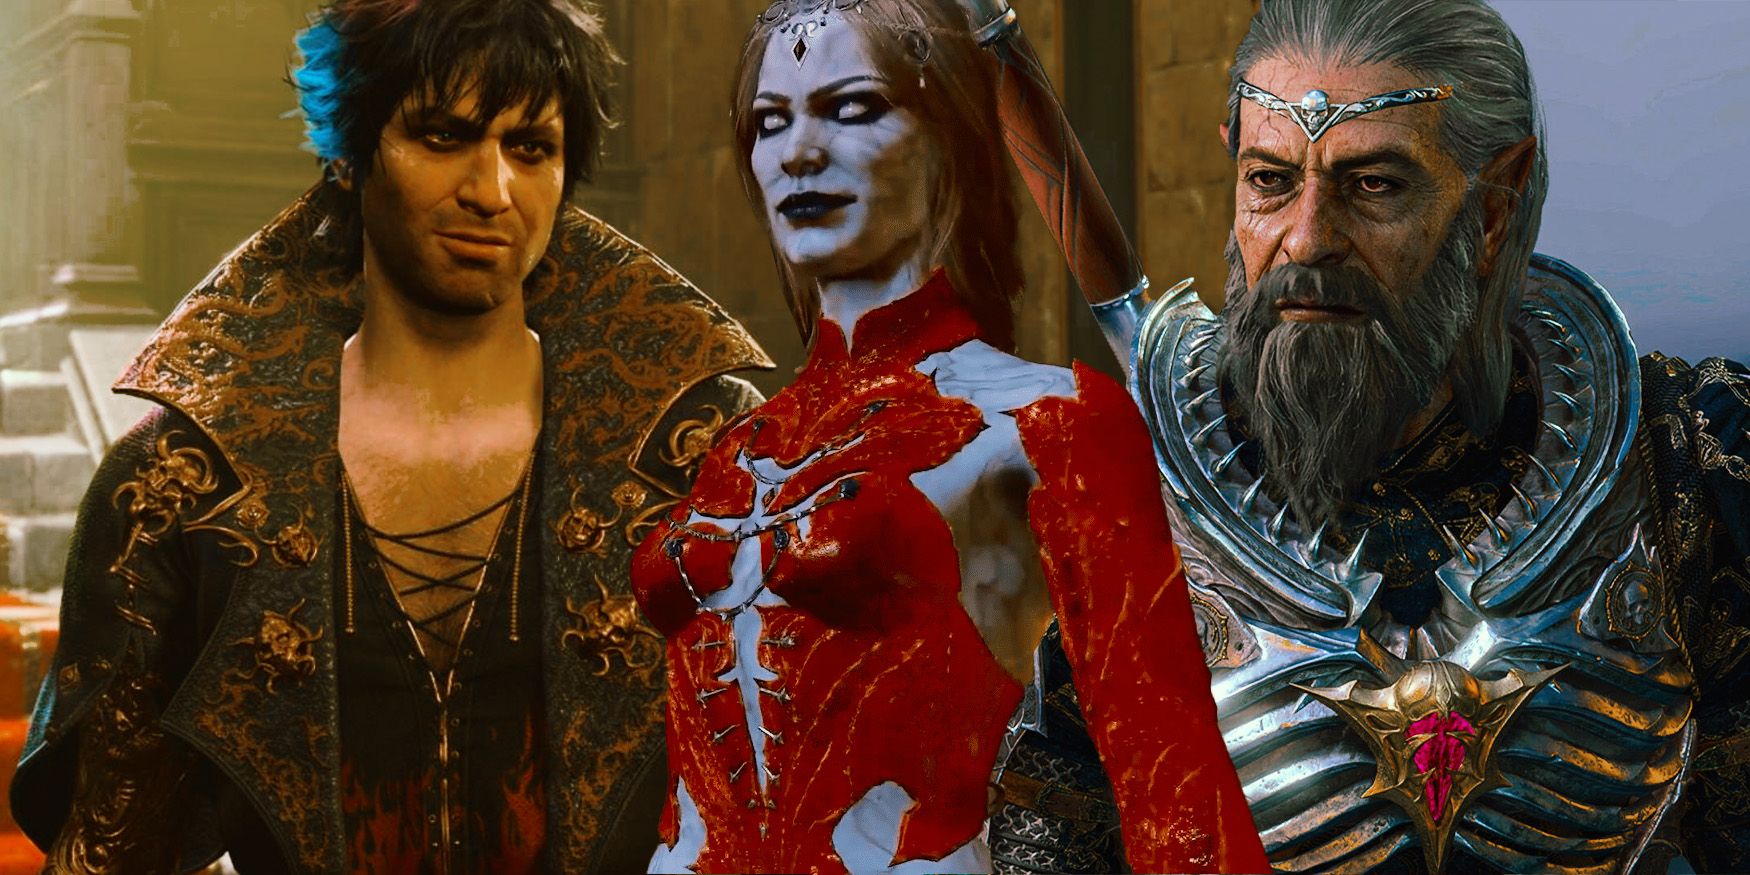 Enver Gortash, Orin the Red, and Ketheric Thorm in Baldur's Gate 3, from left to right.